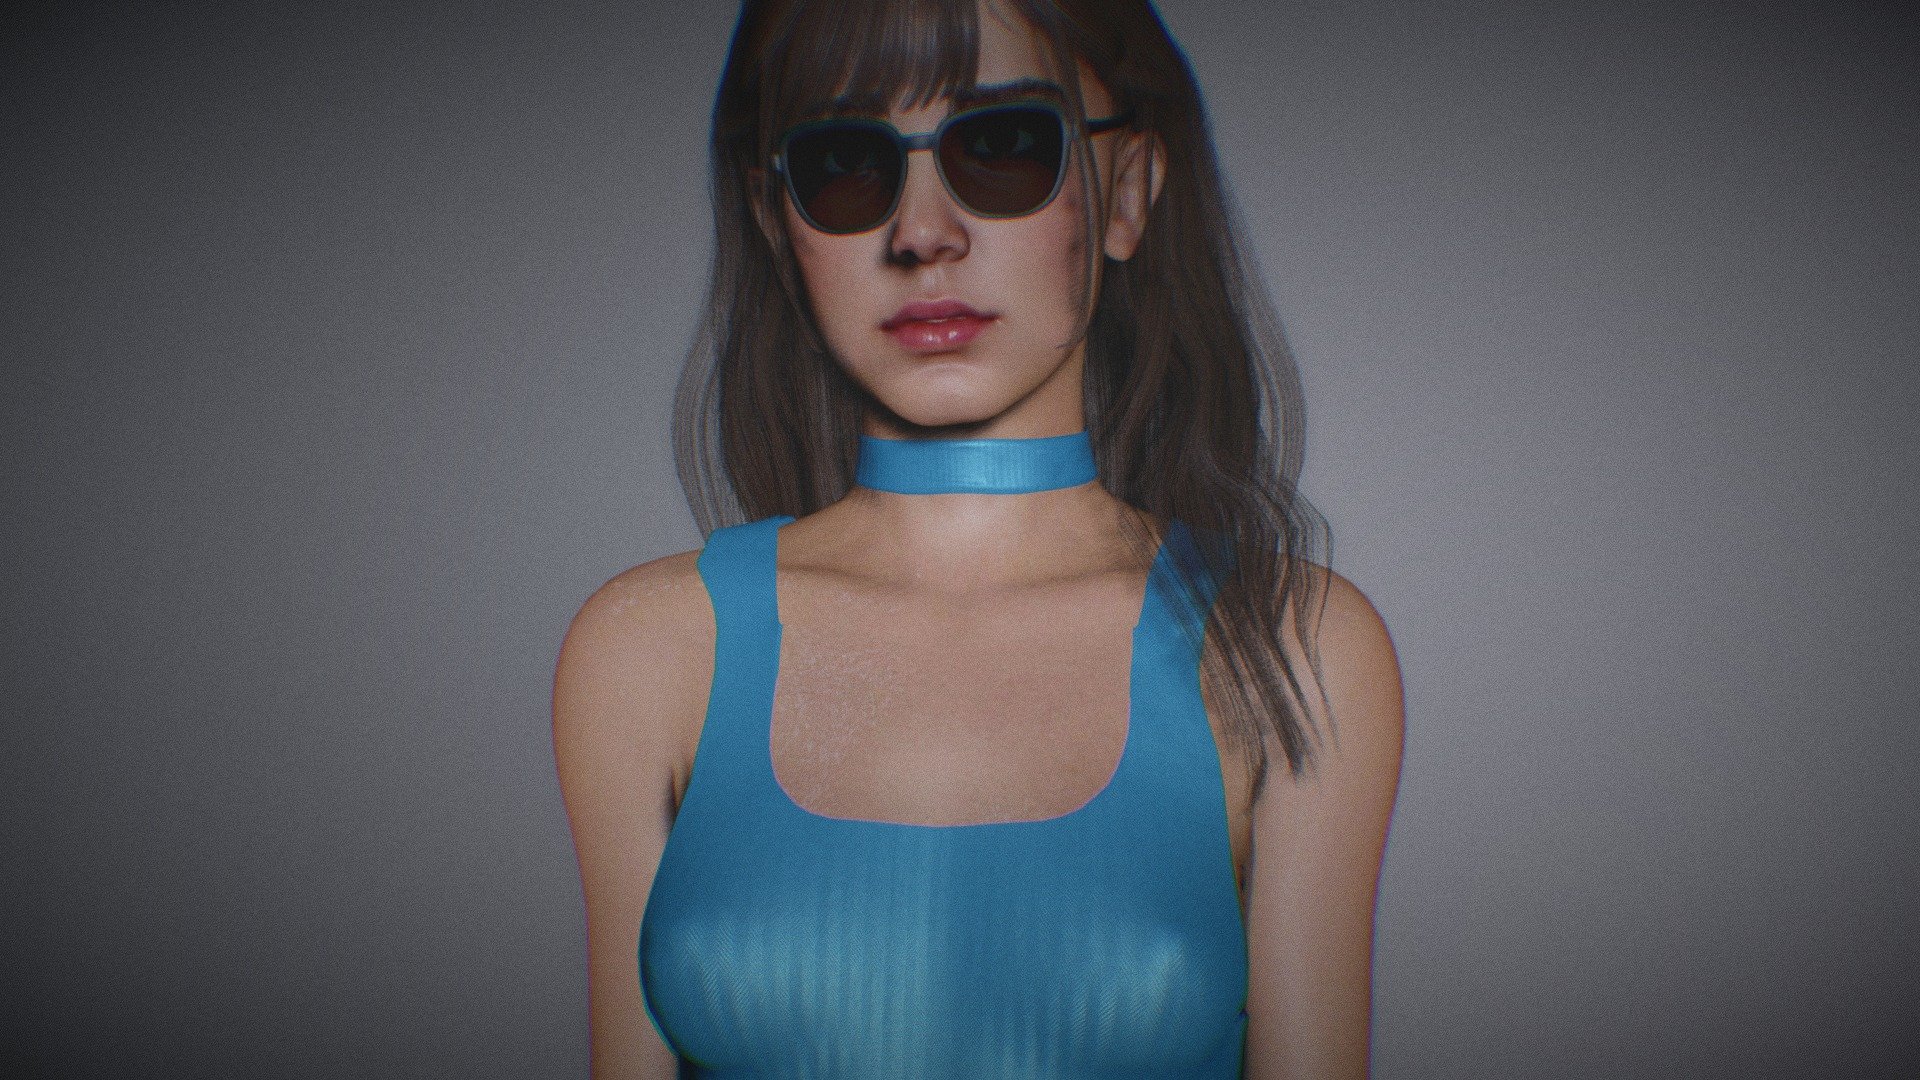 Cute Female  woman swimsuit  girl with sunglasses . Rigged Body and face. Subsurface scattering. model in Blender file 3d model